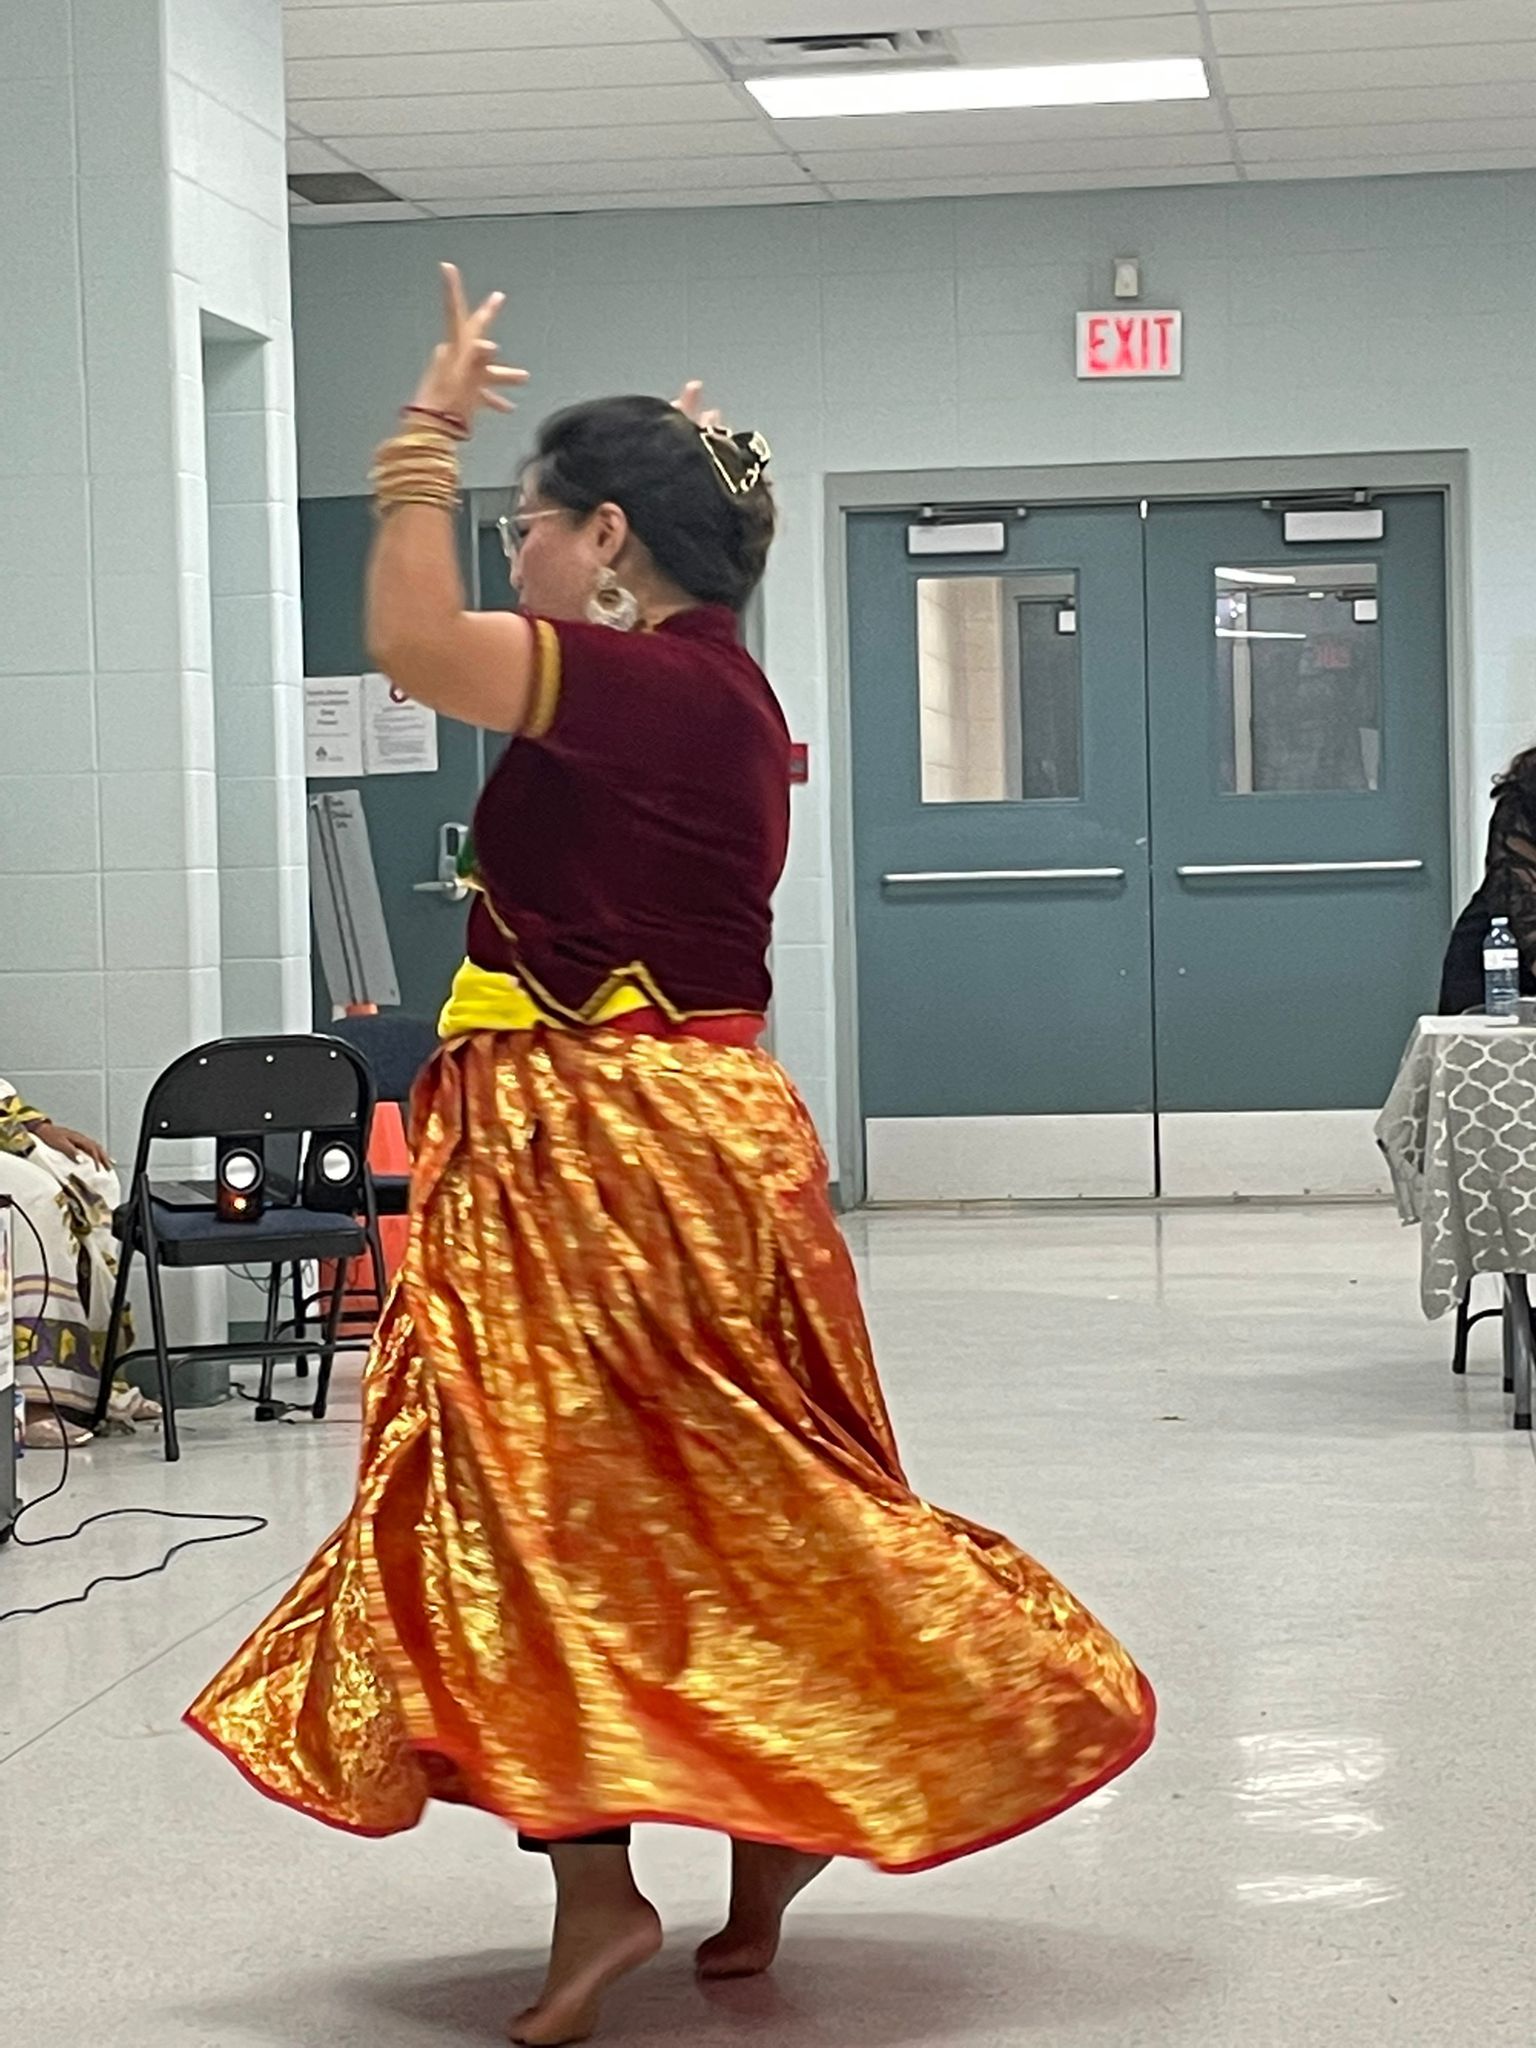 A dancer in wearing a gold colored skirt and red blouse doing a cultural dance.